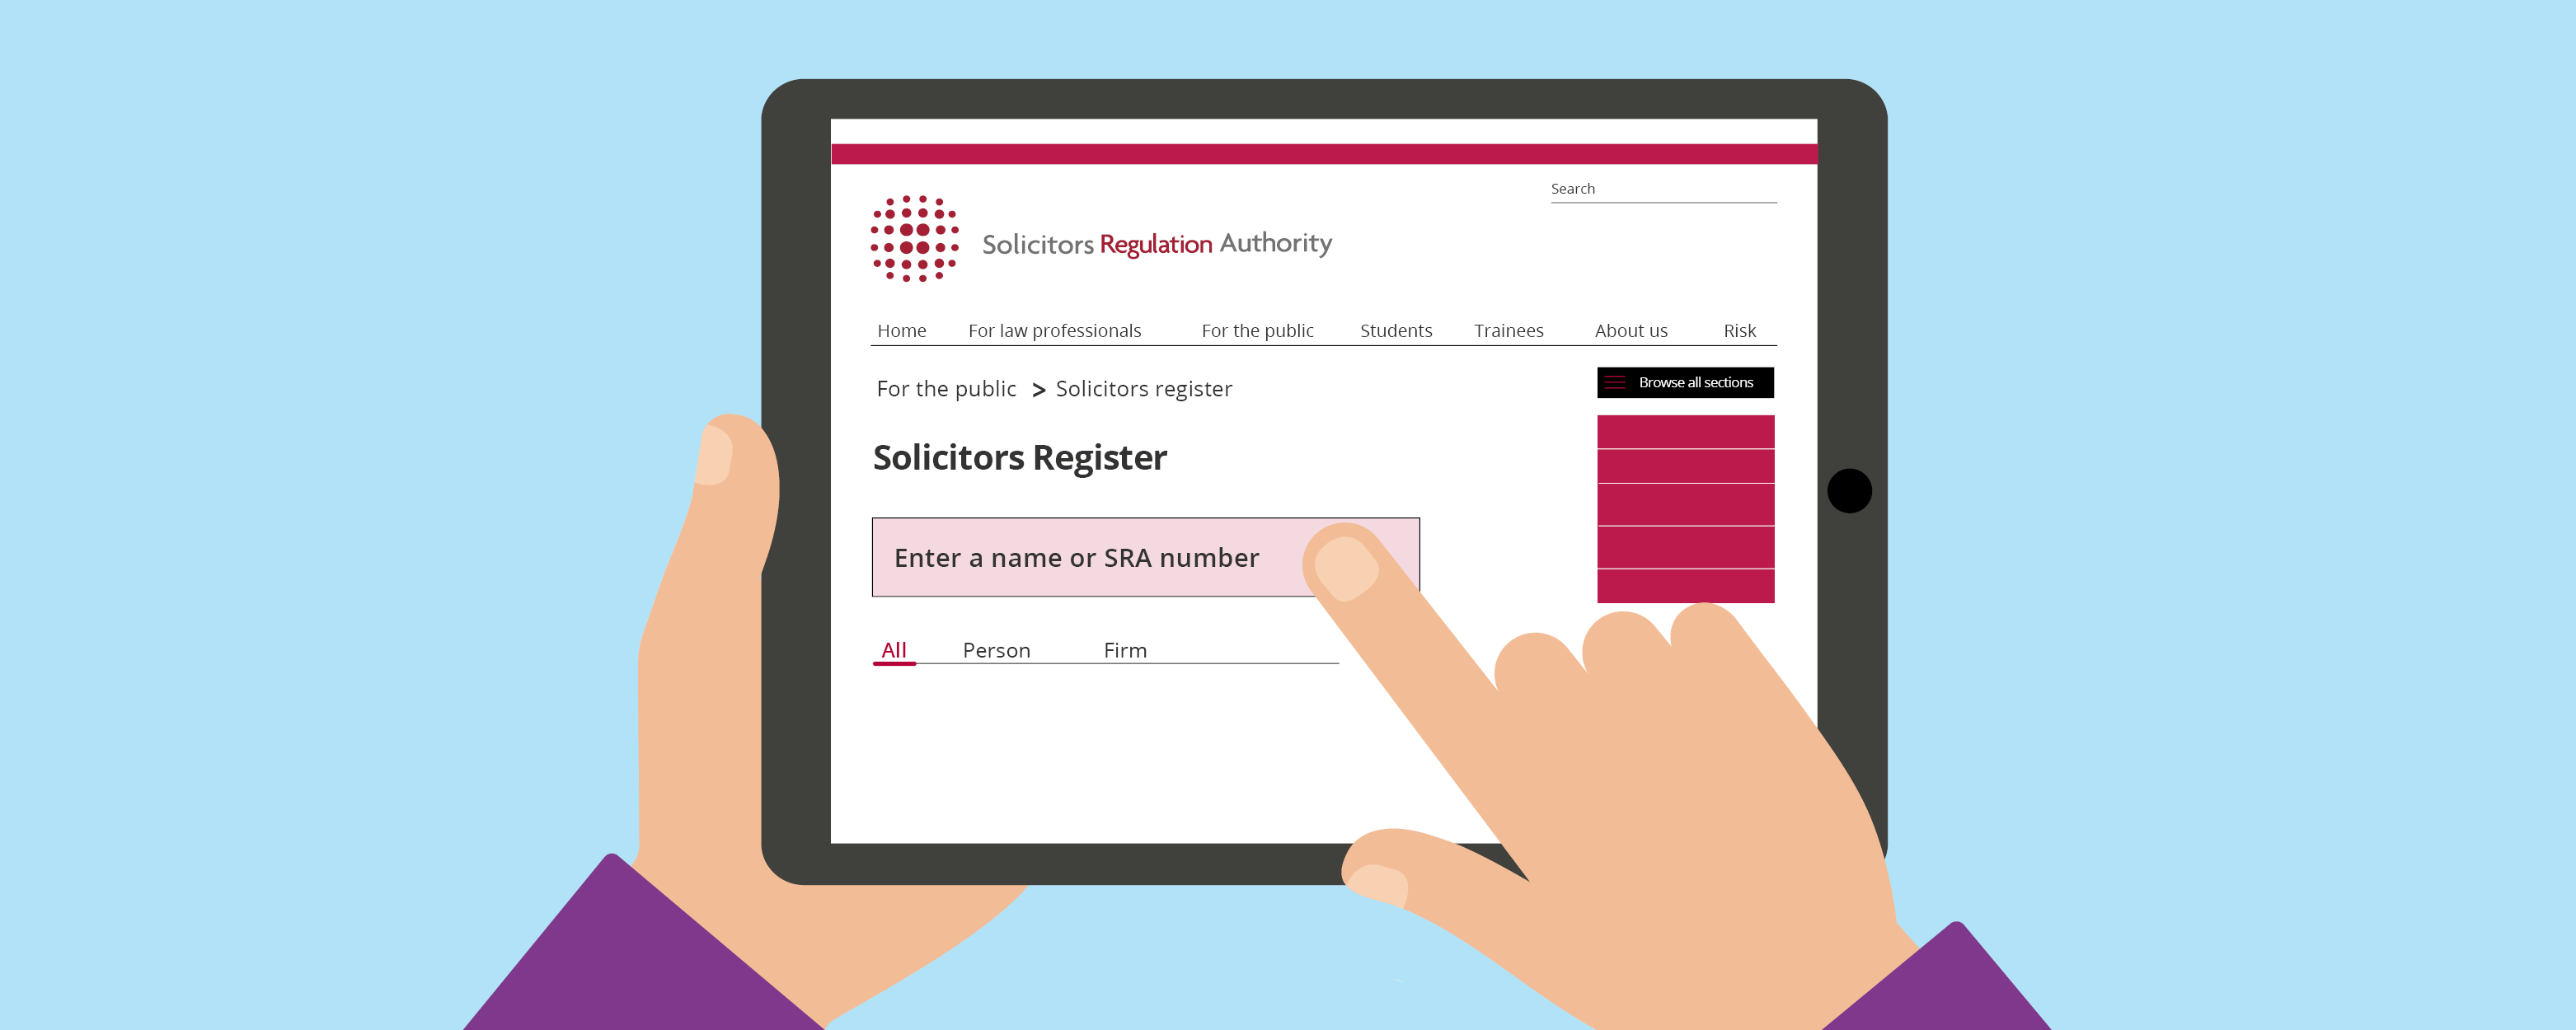 Checking the Solicitors Register